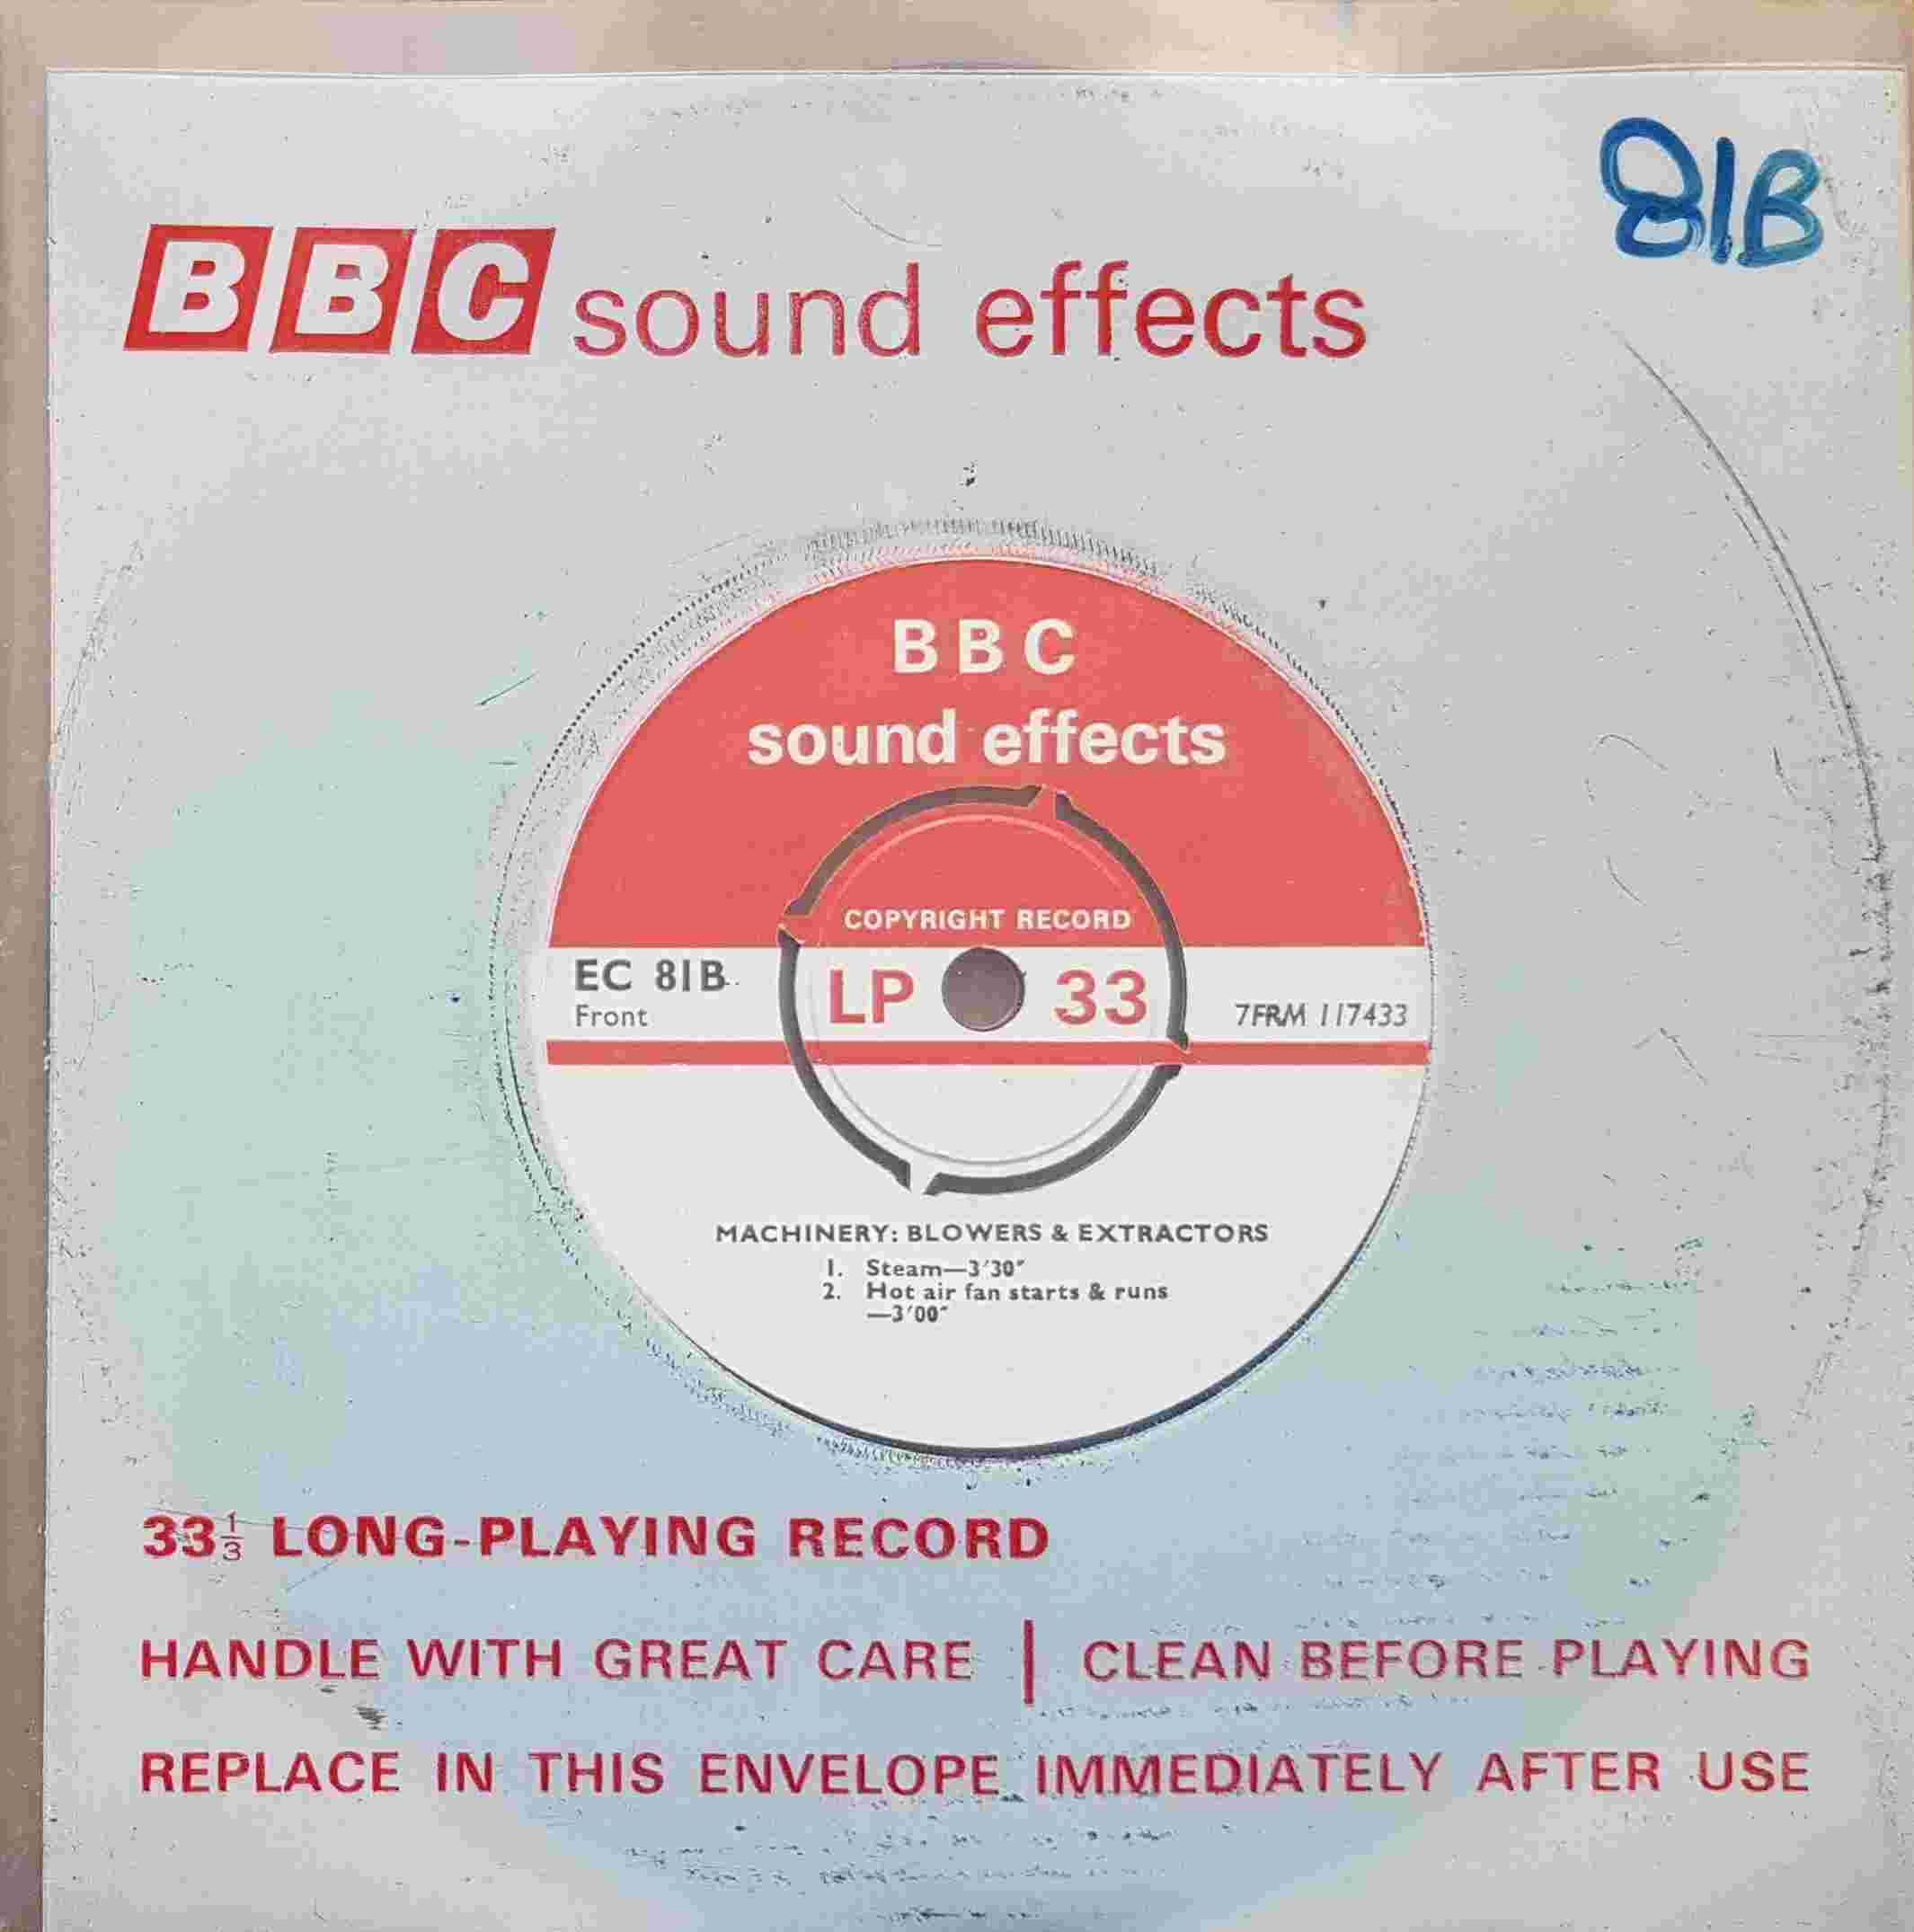 Picture of EC 81B Machinery: Blowers & extractors by artist Not registered from the BBC records and Tapes library